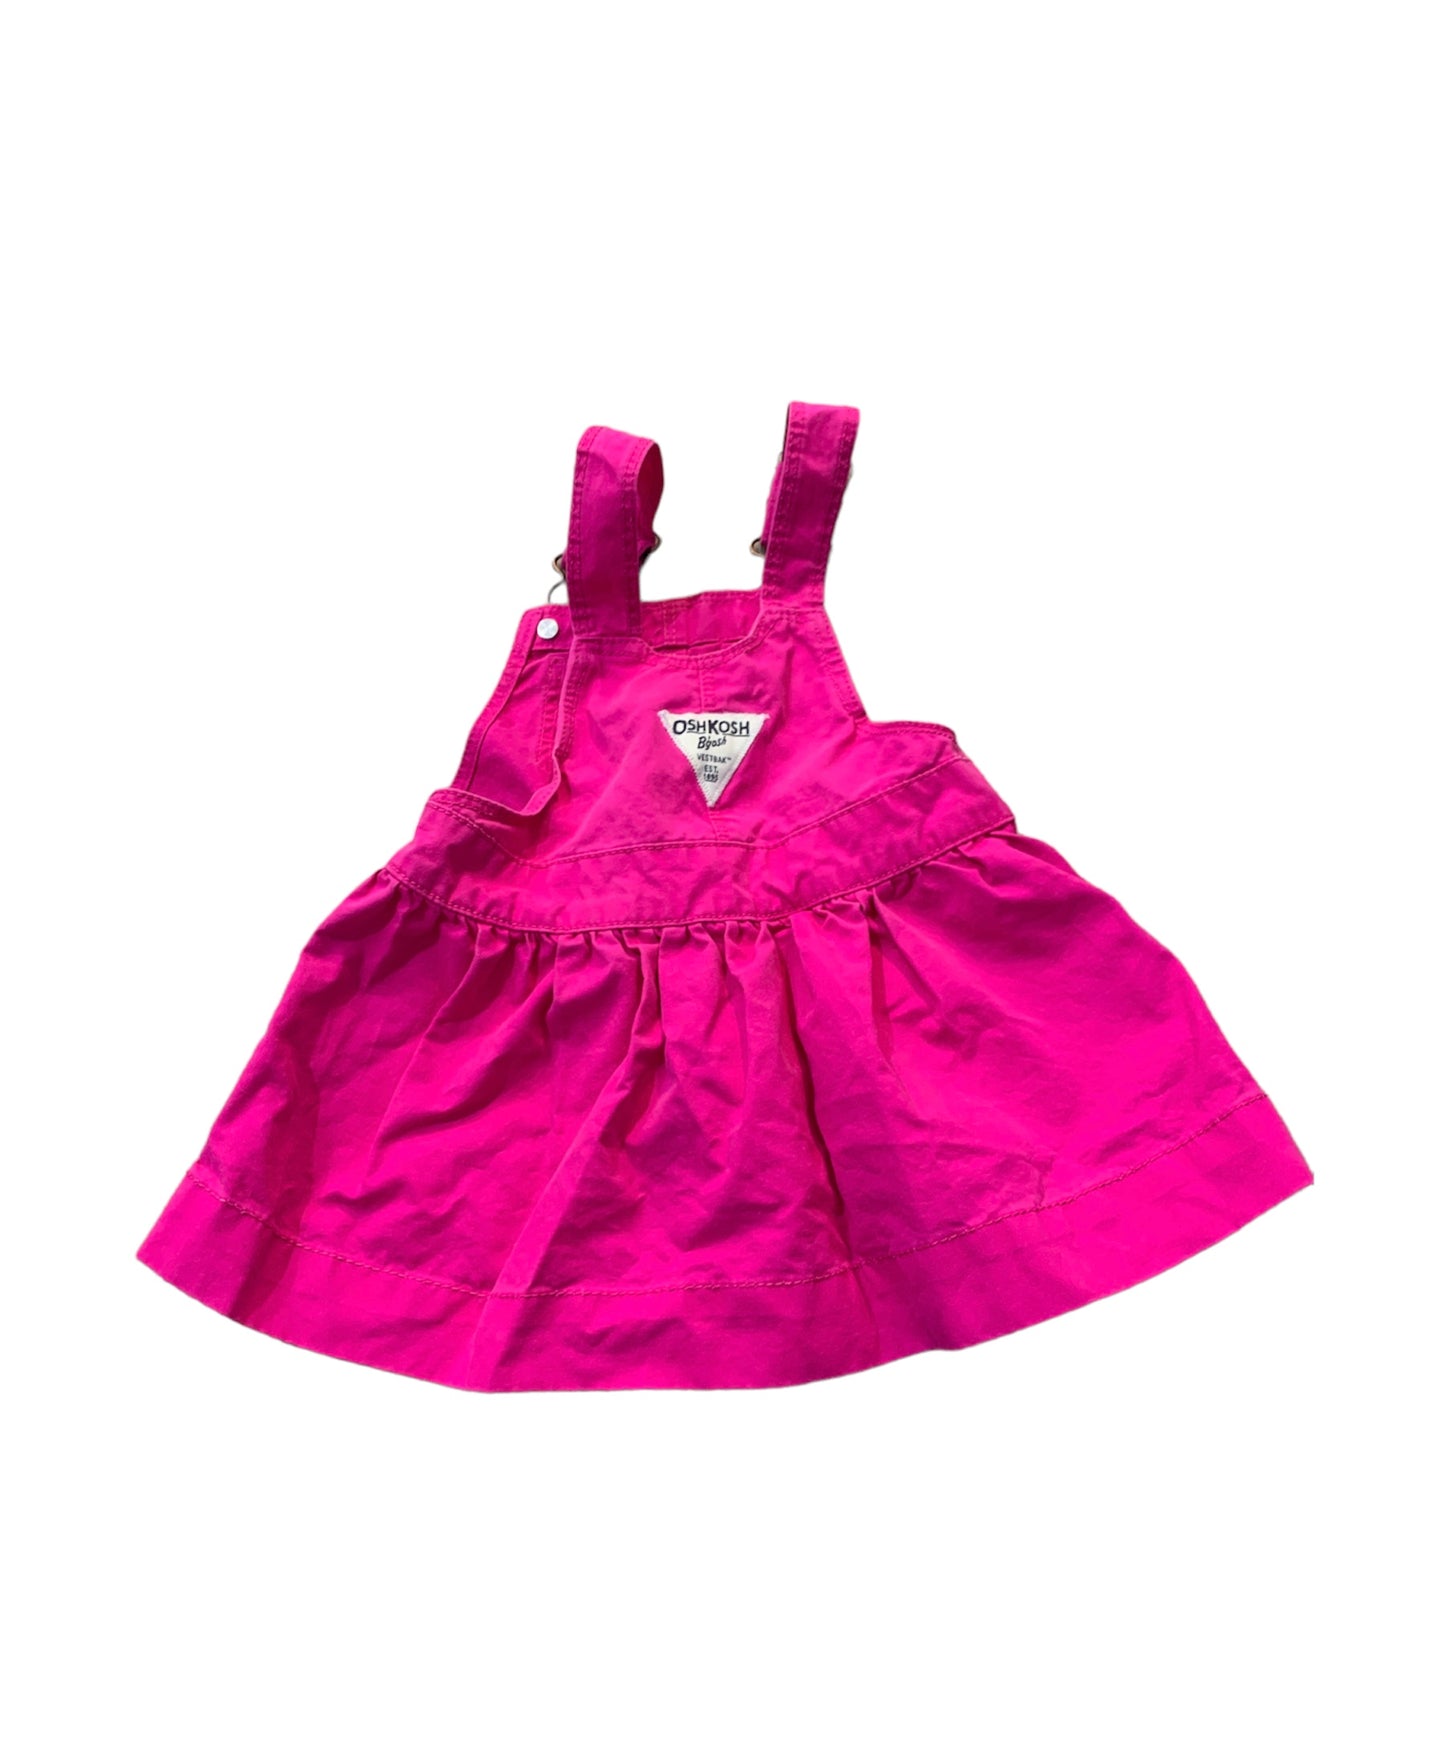 Vibrant Pink Overall Dress size 12m